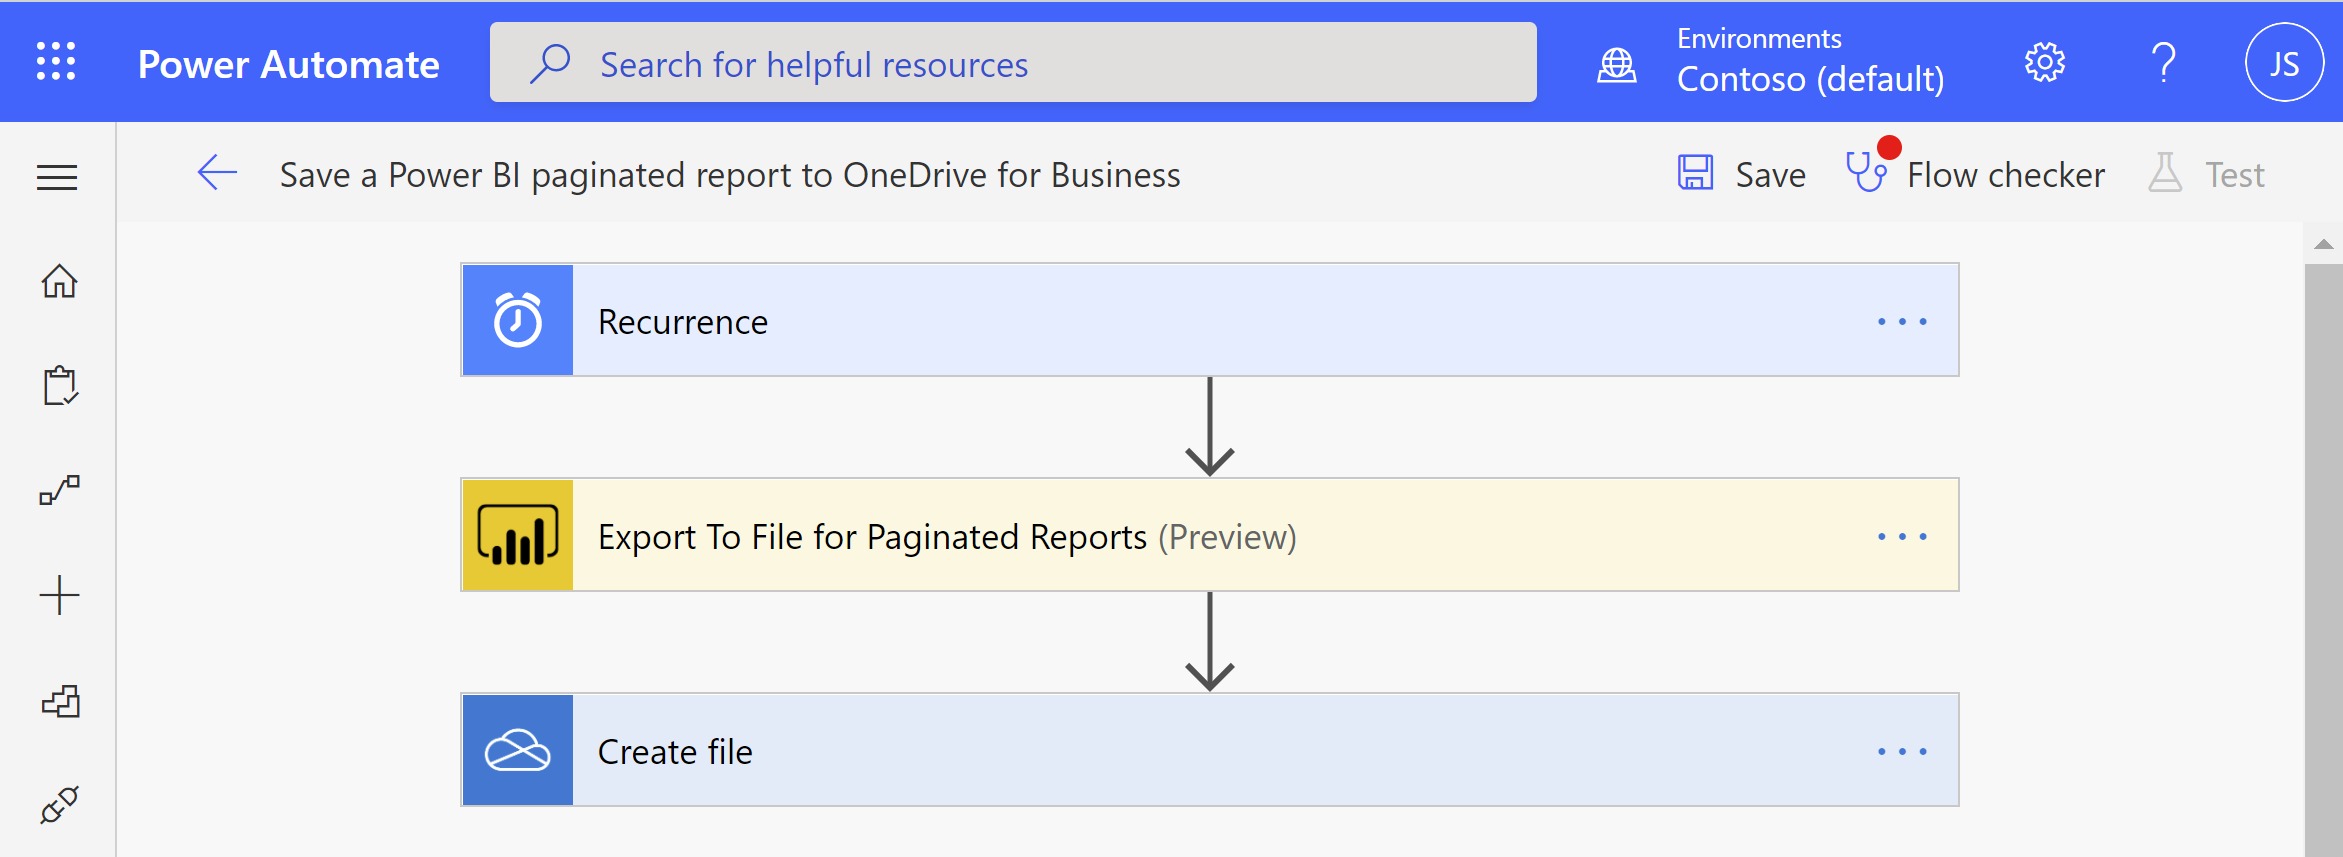 Screenshot of the Power Automate flow for saving a paginated report to OneDrive or SharePoint Online